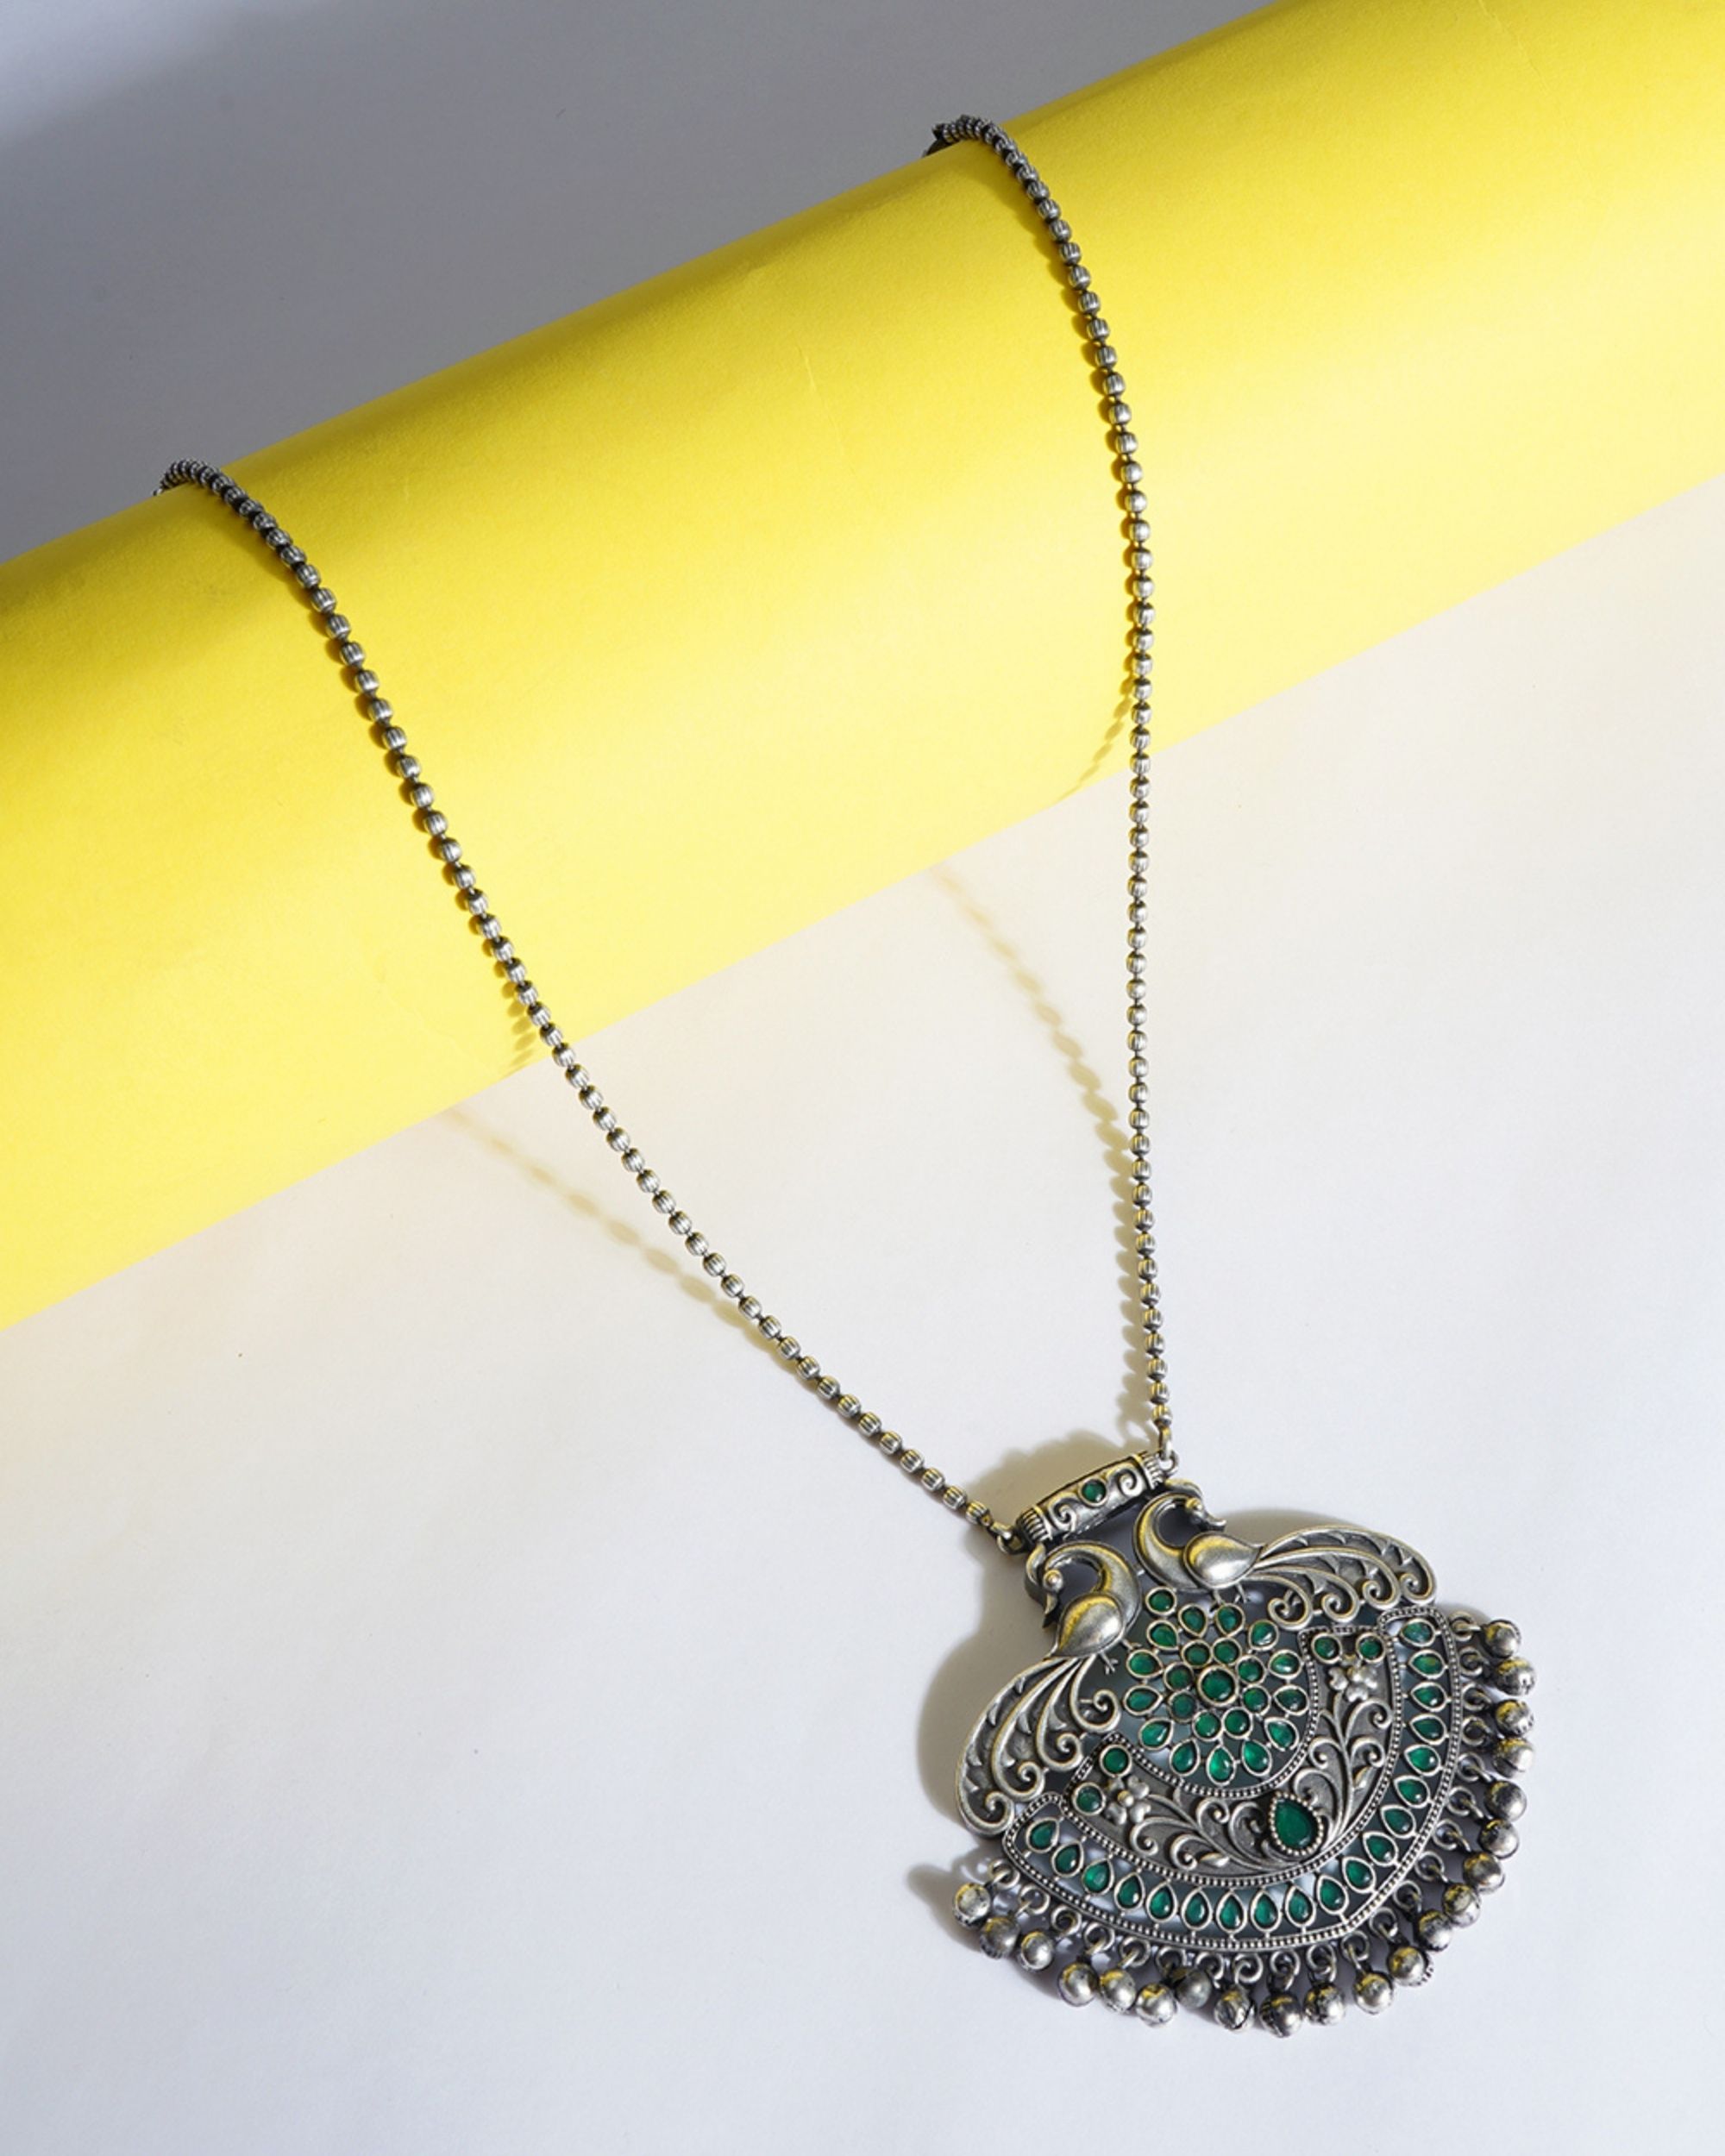 Peacock designed metal beaded necklace